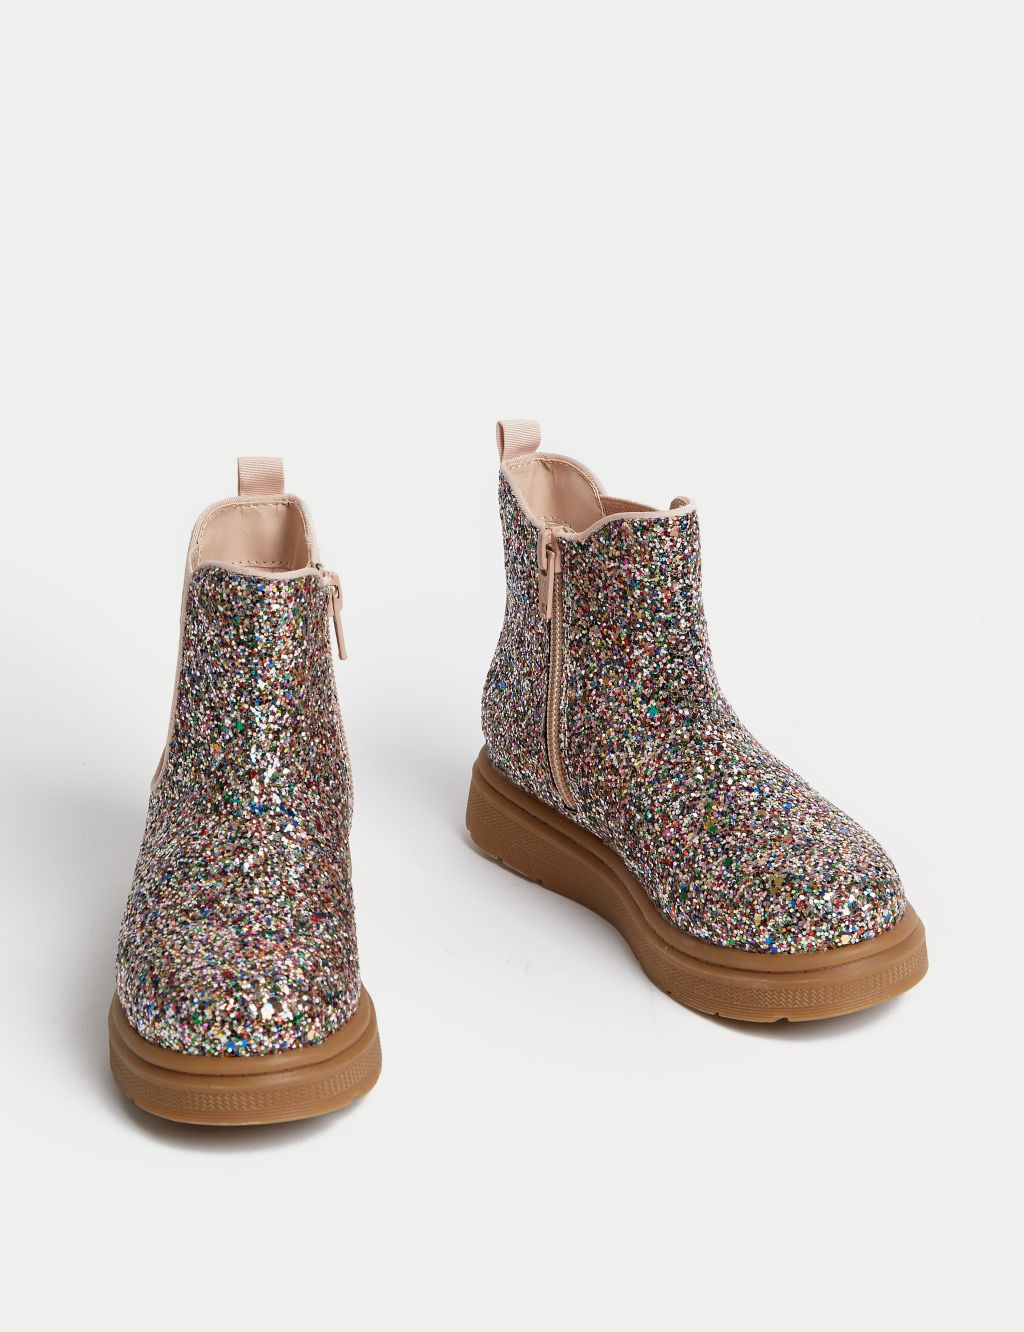 Kids' Glitter Chelsea Boots (4 Small - 13 Small) image 2